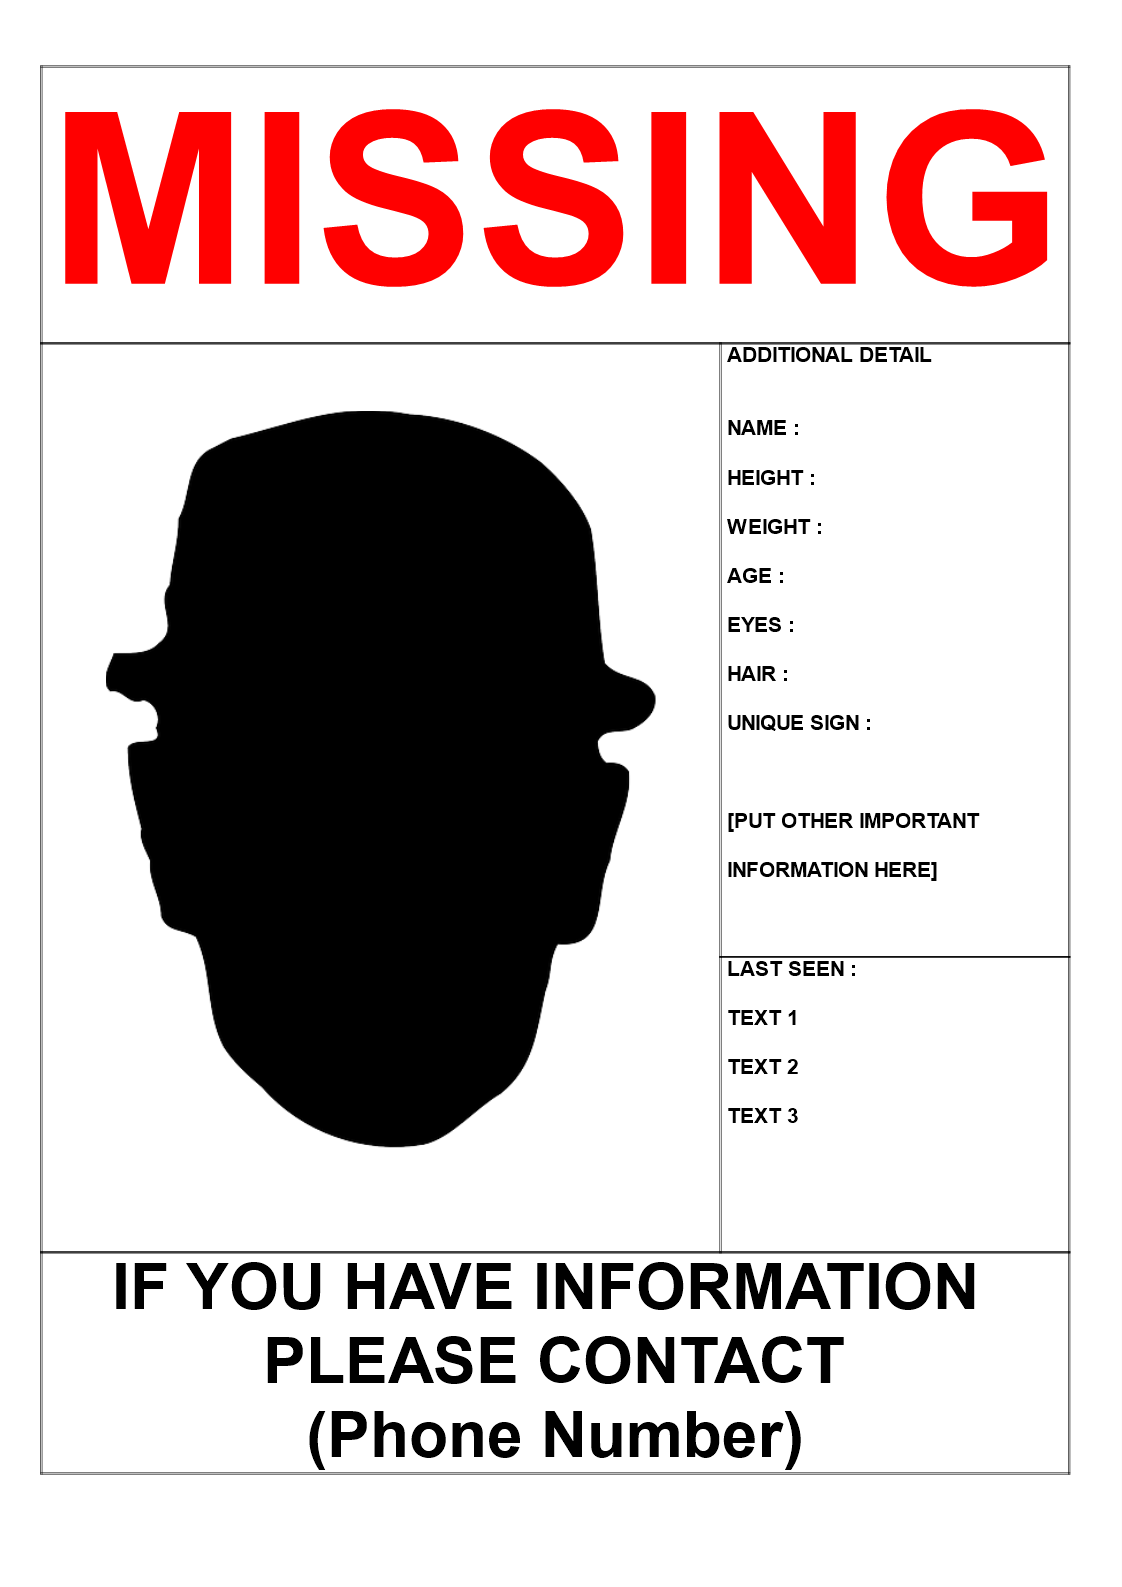 Missing Person Poster Template In A3 Size Templates At Allbusinesstemplates